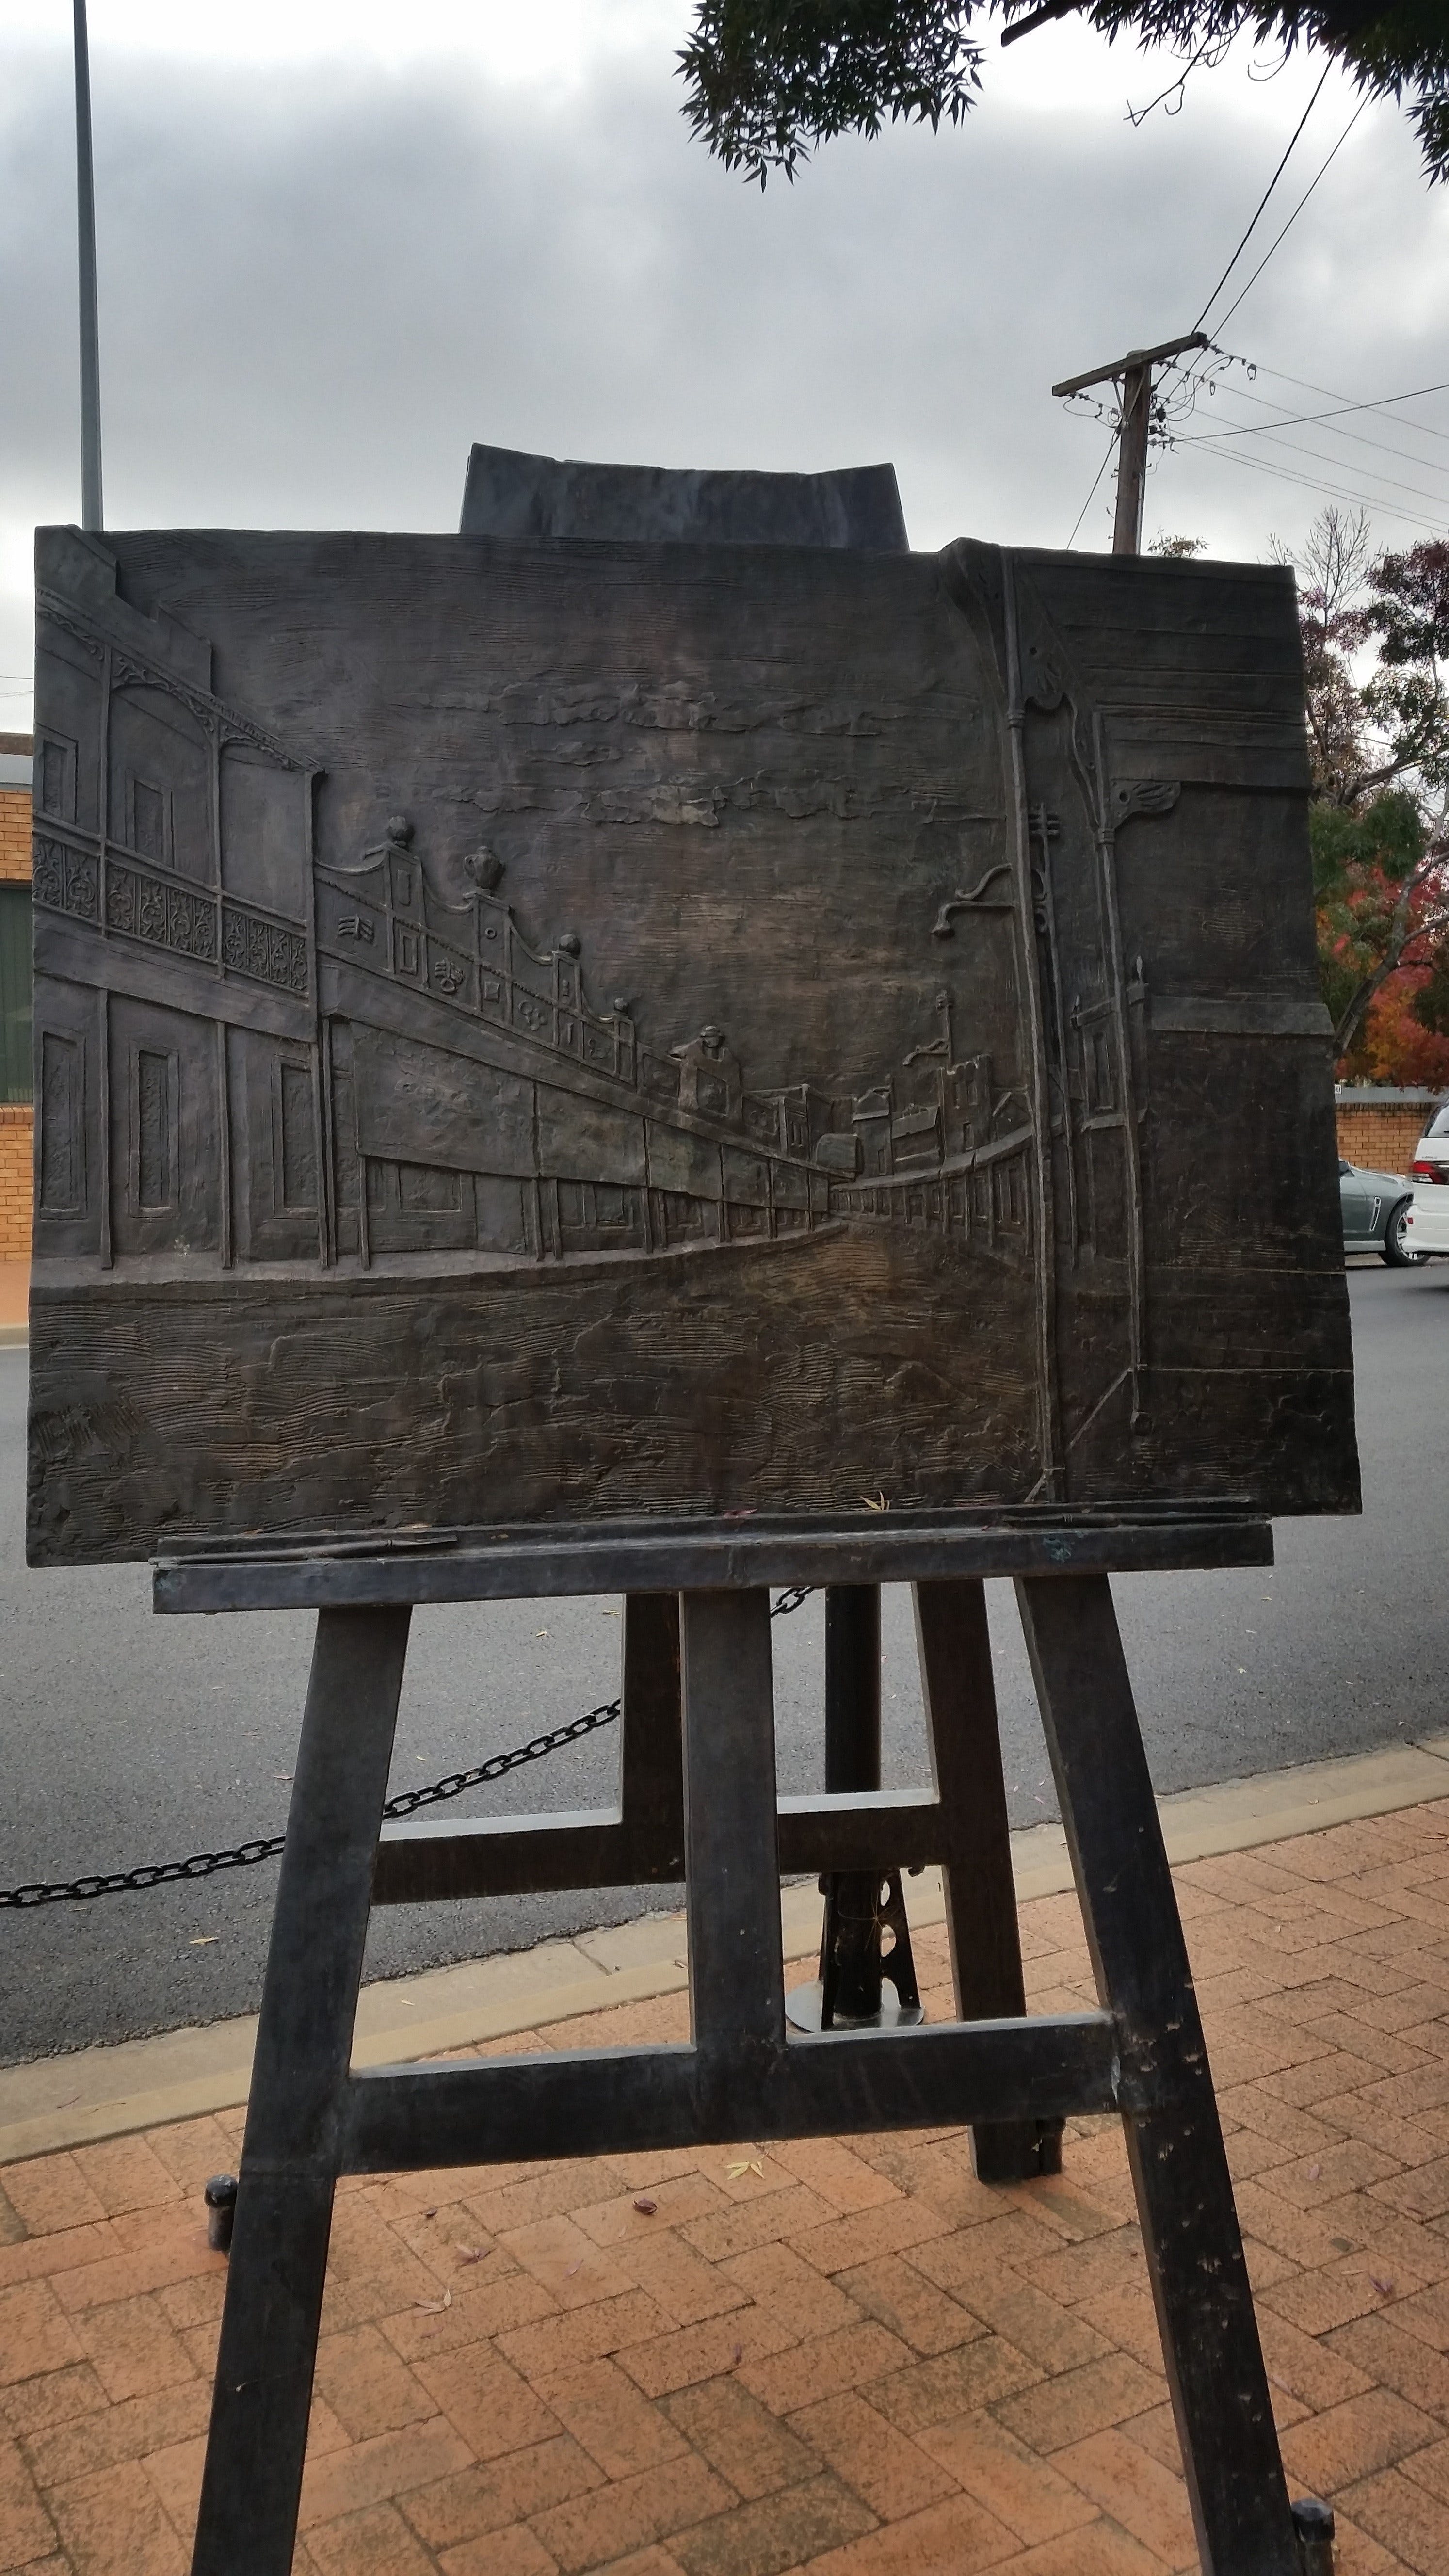 Russell Drysdale Easel Sculpture - Australia Accommodation